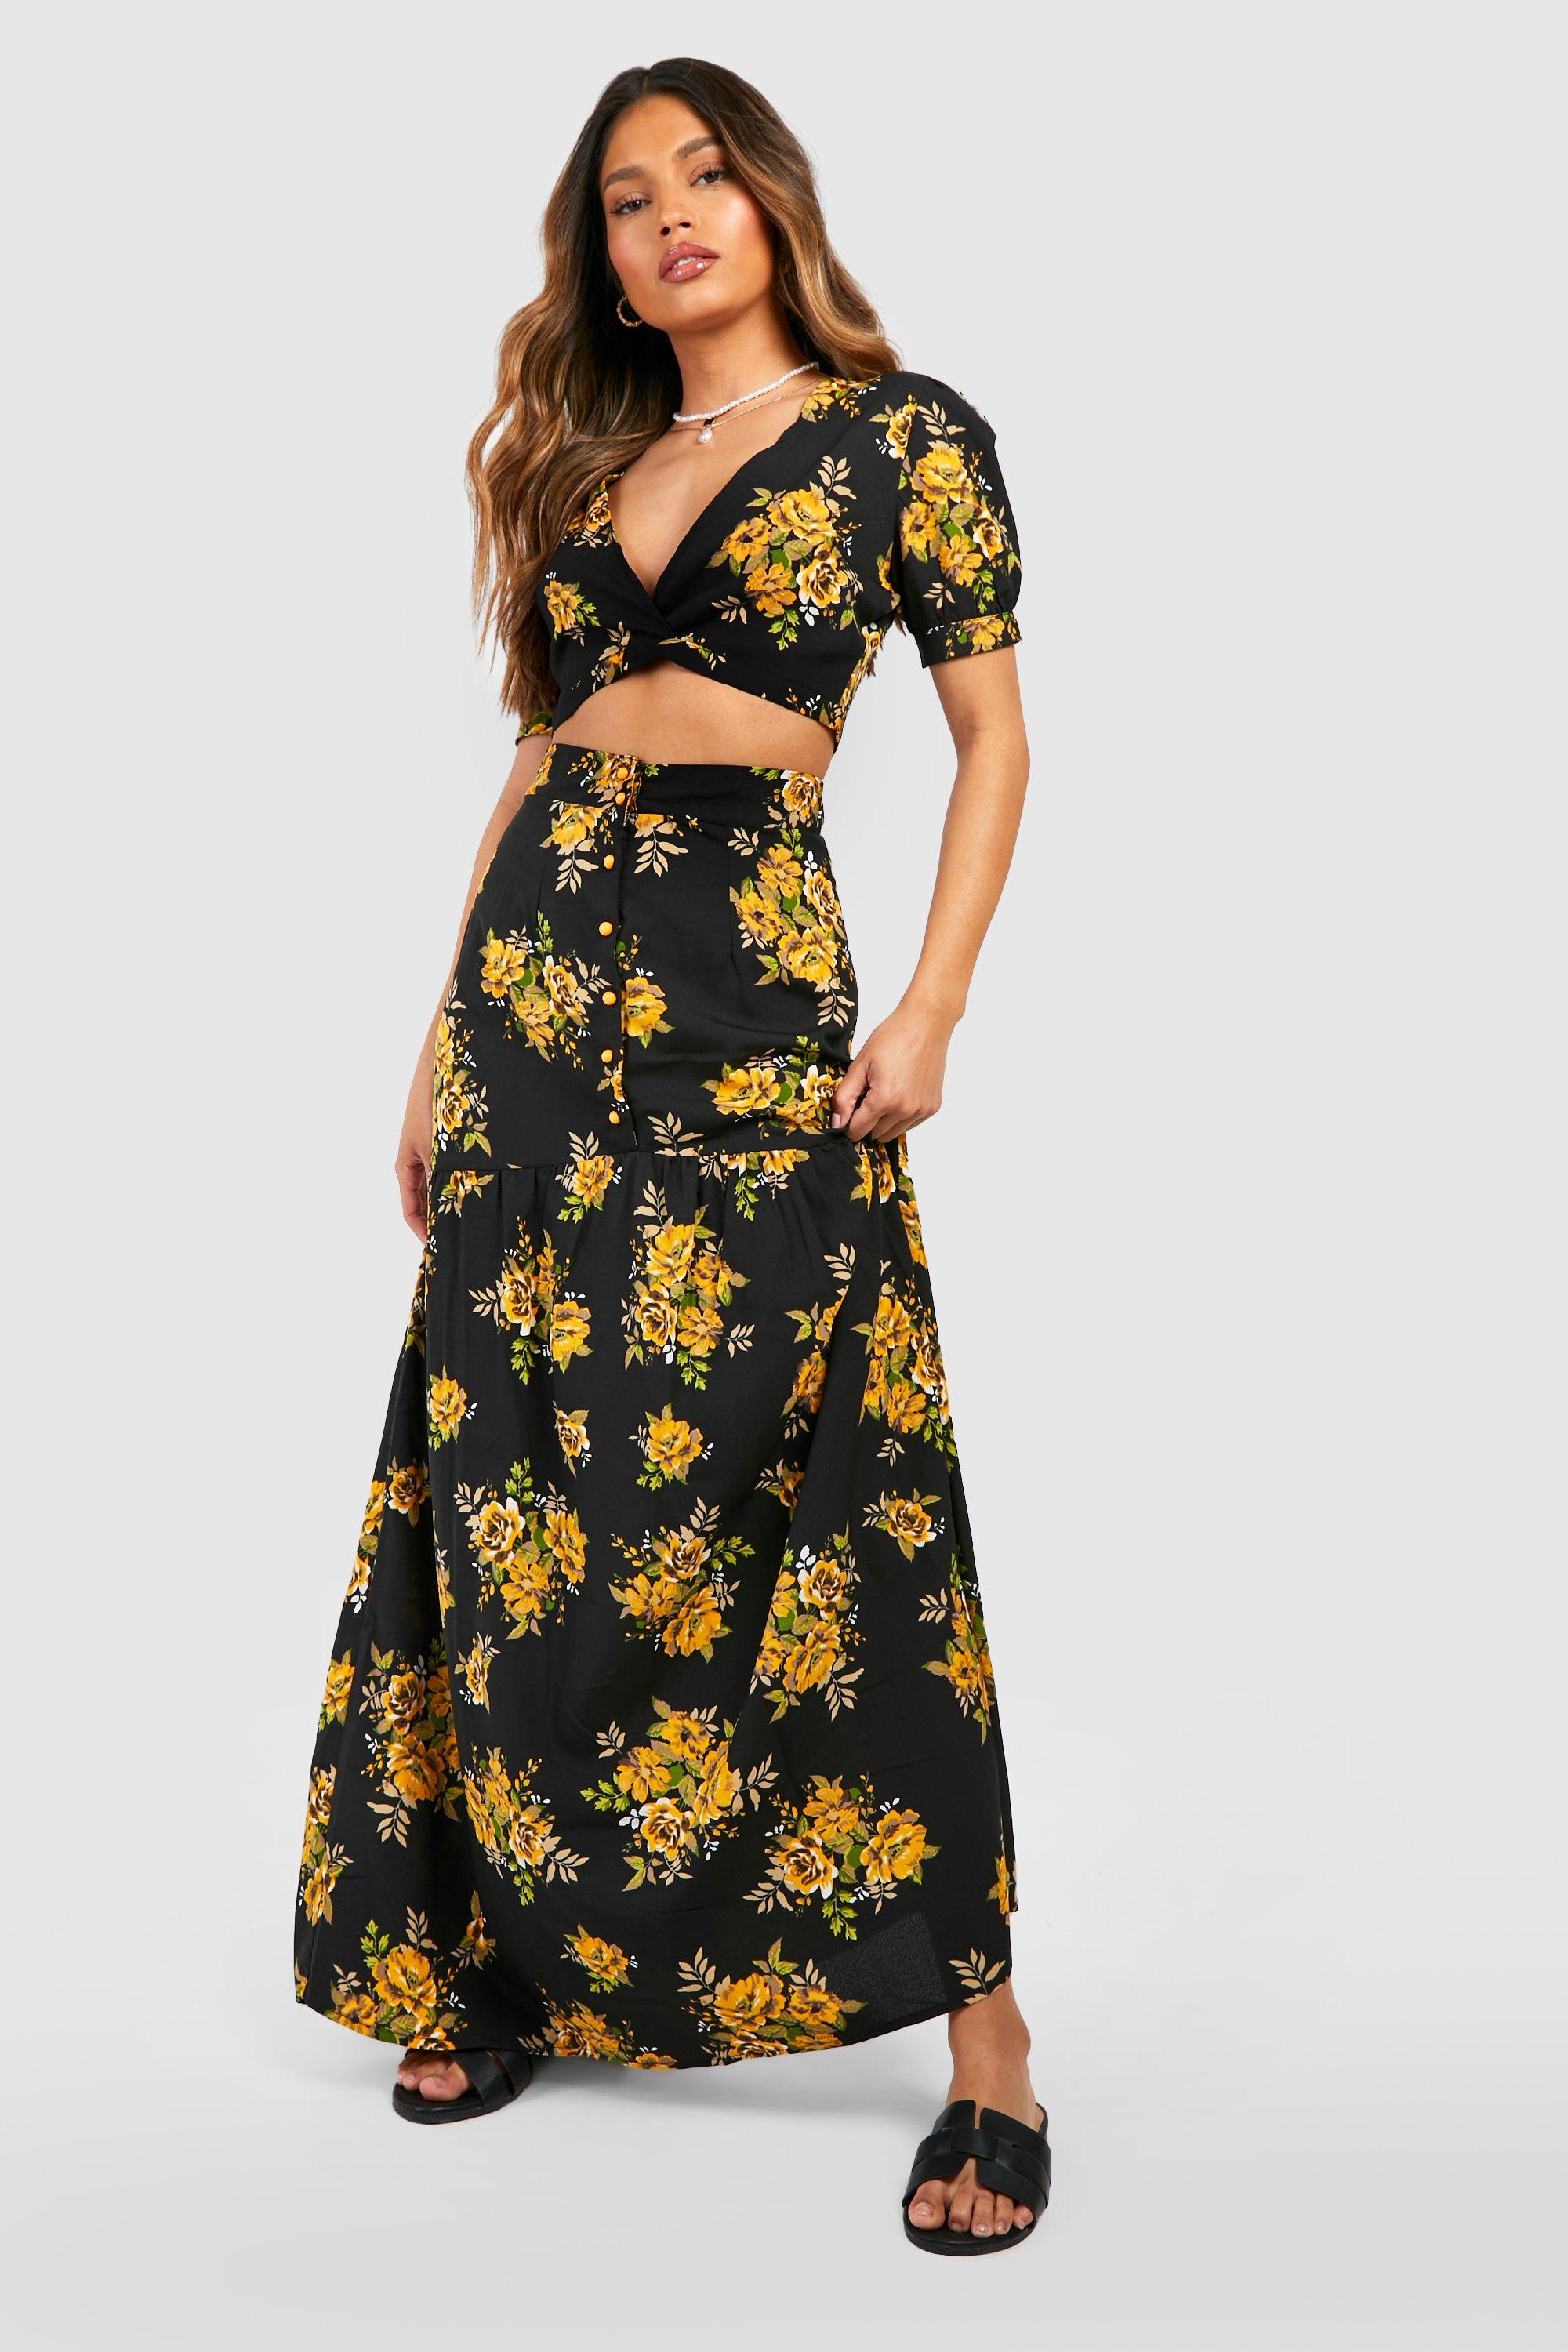 maxi skirt and top co ord